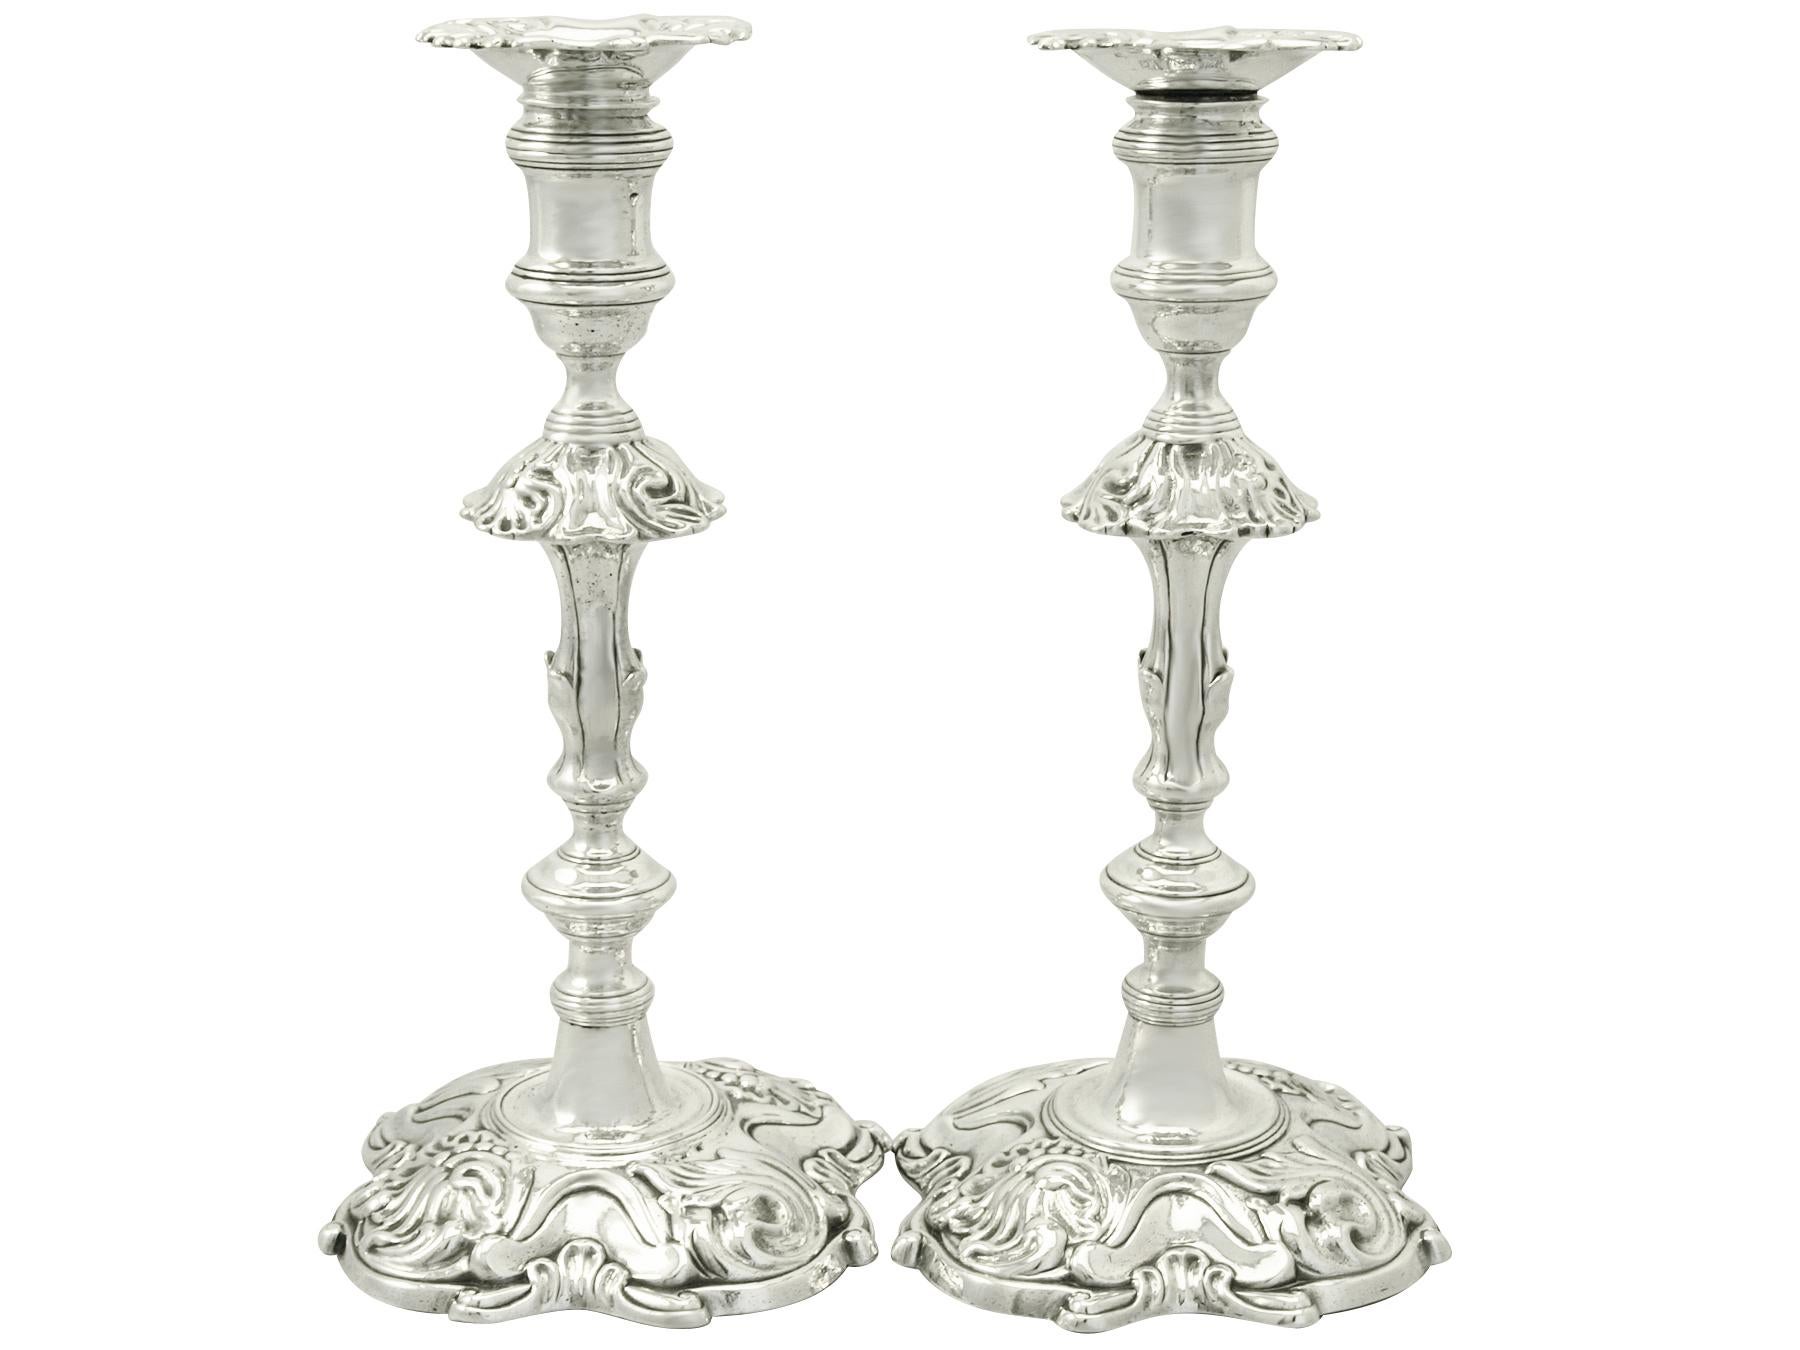 An exceptional, fine and impressive pair of antique Georgian English sterling silver candlesticks; part of our antique ornamental silverware collection.

These exceptional antique George II English cast sterling silver candlesticks have a plain